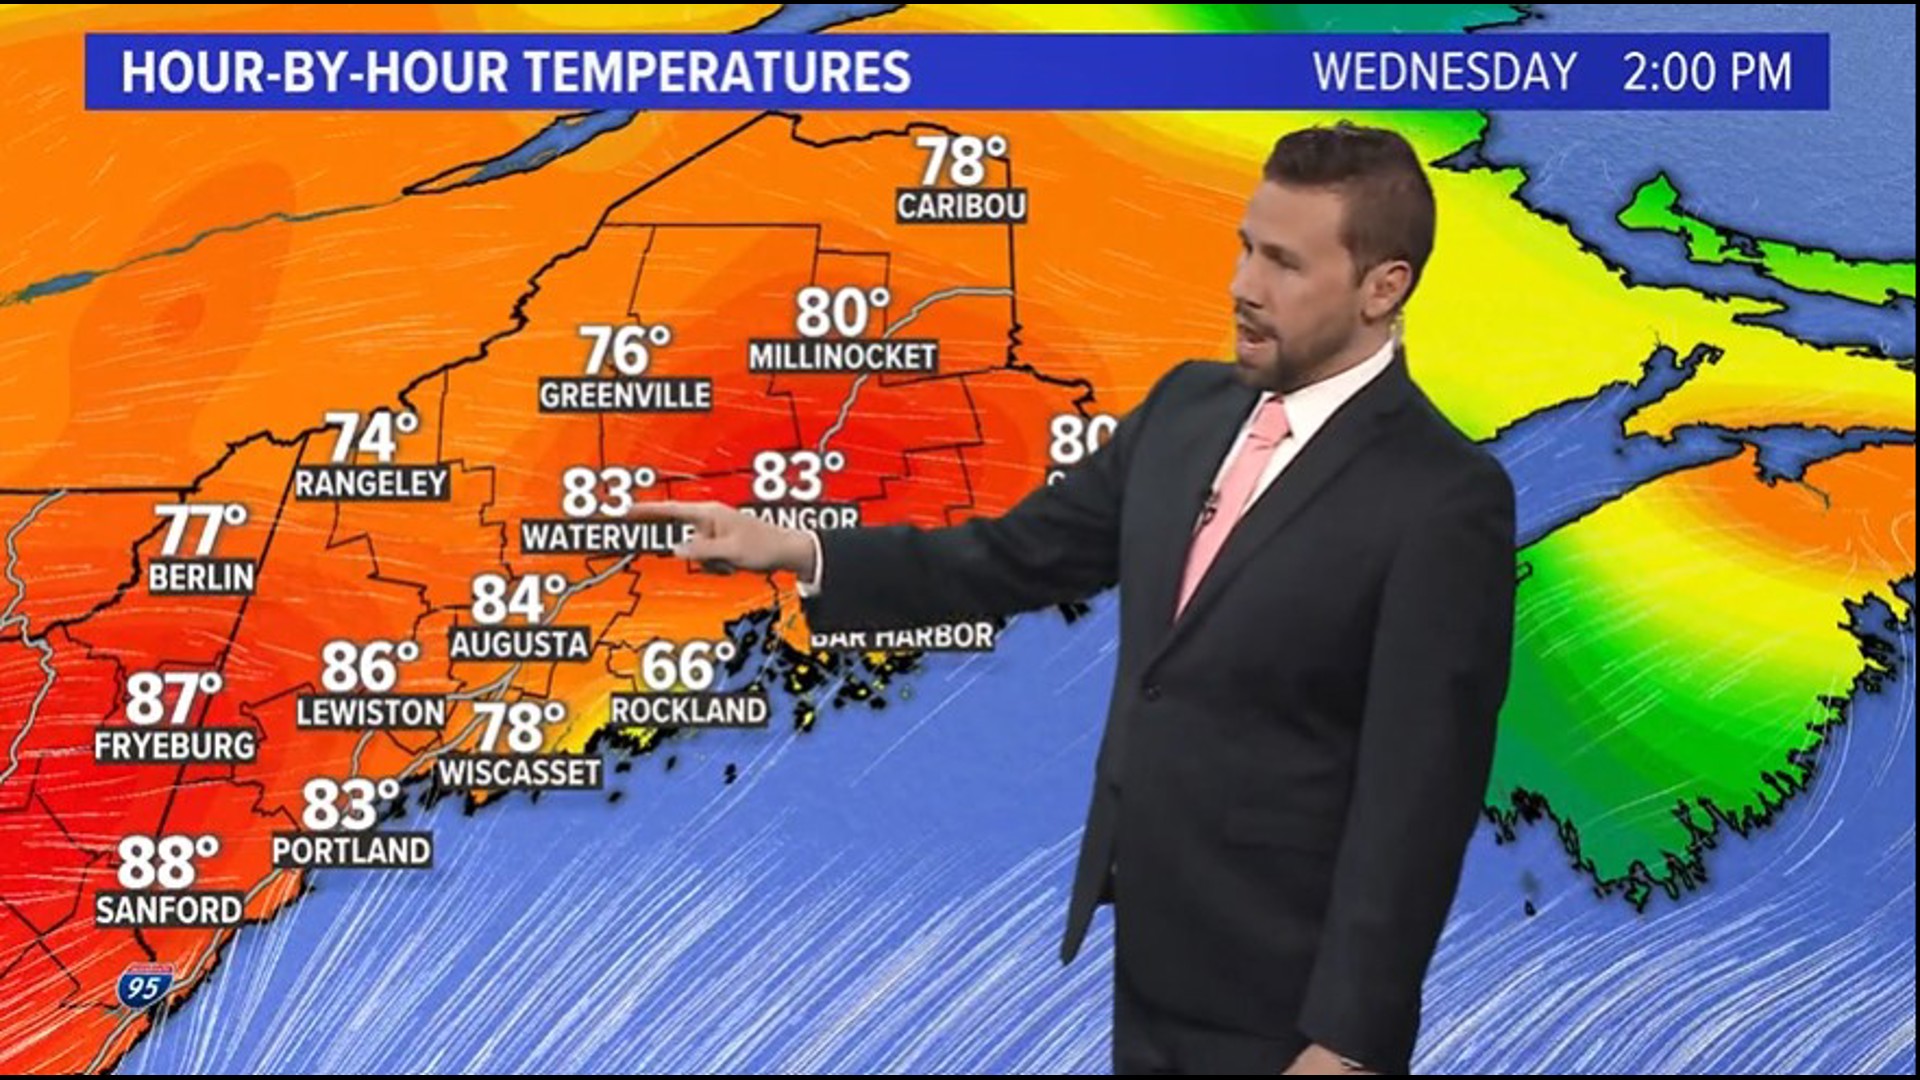 Temperatures in Maine next week are expected to feel like summer.